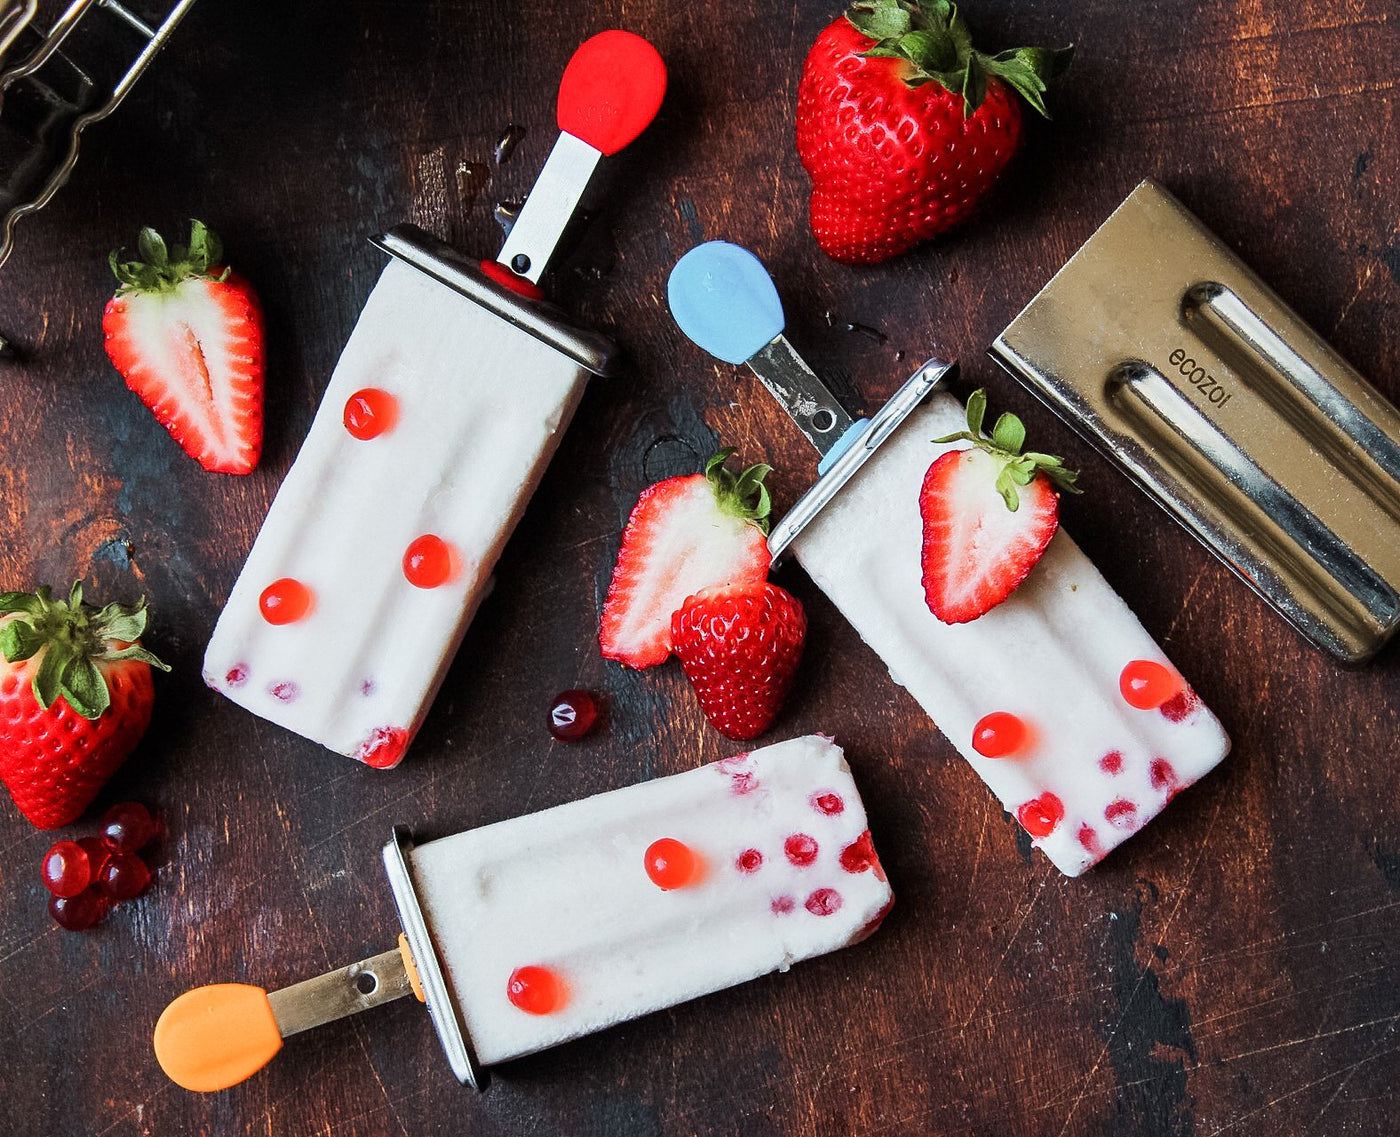 ecozoi Stainless Steel Popsicle Molds with Stainless Steel Sticks